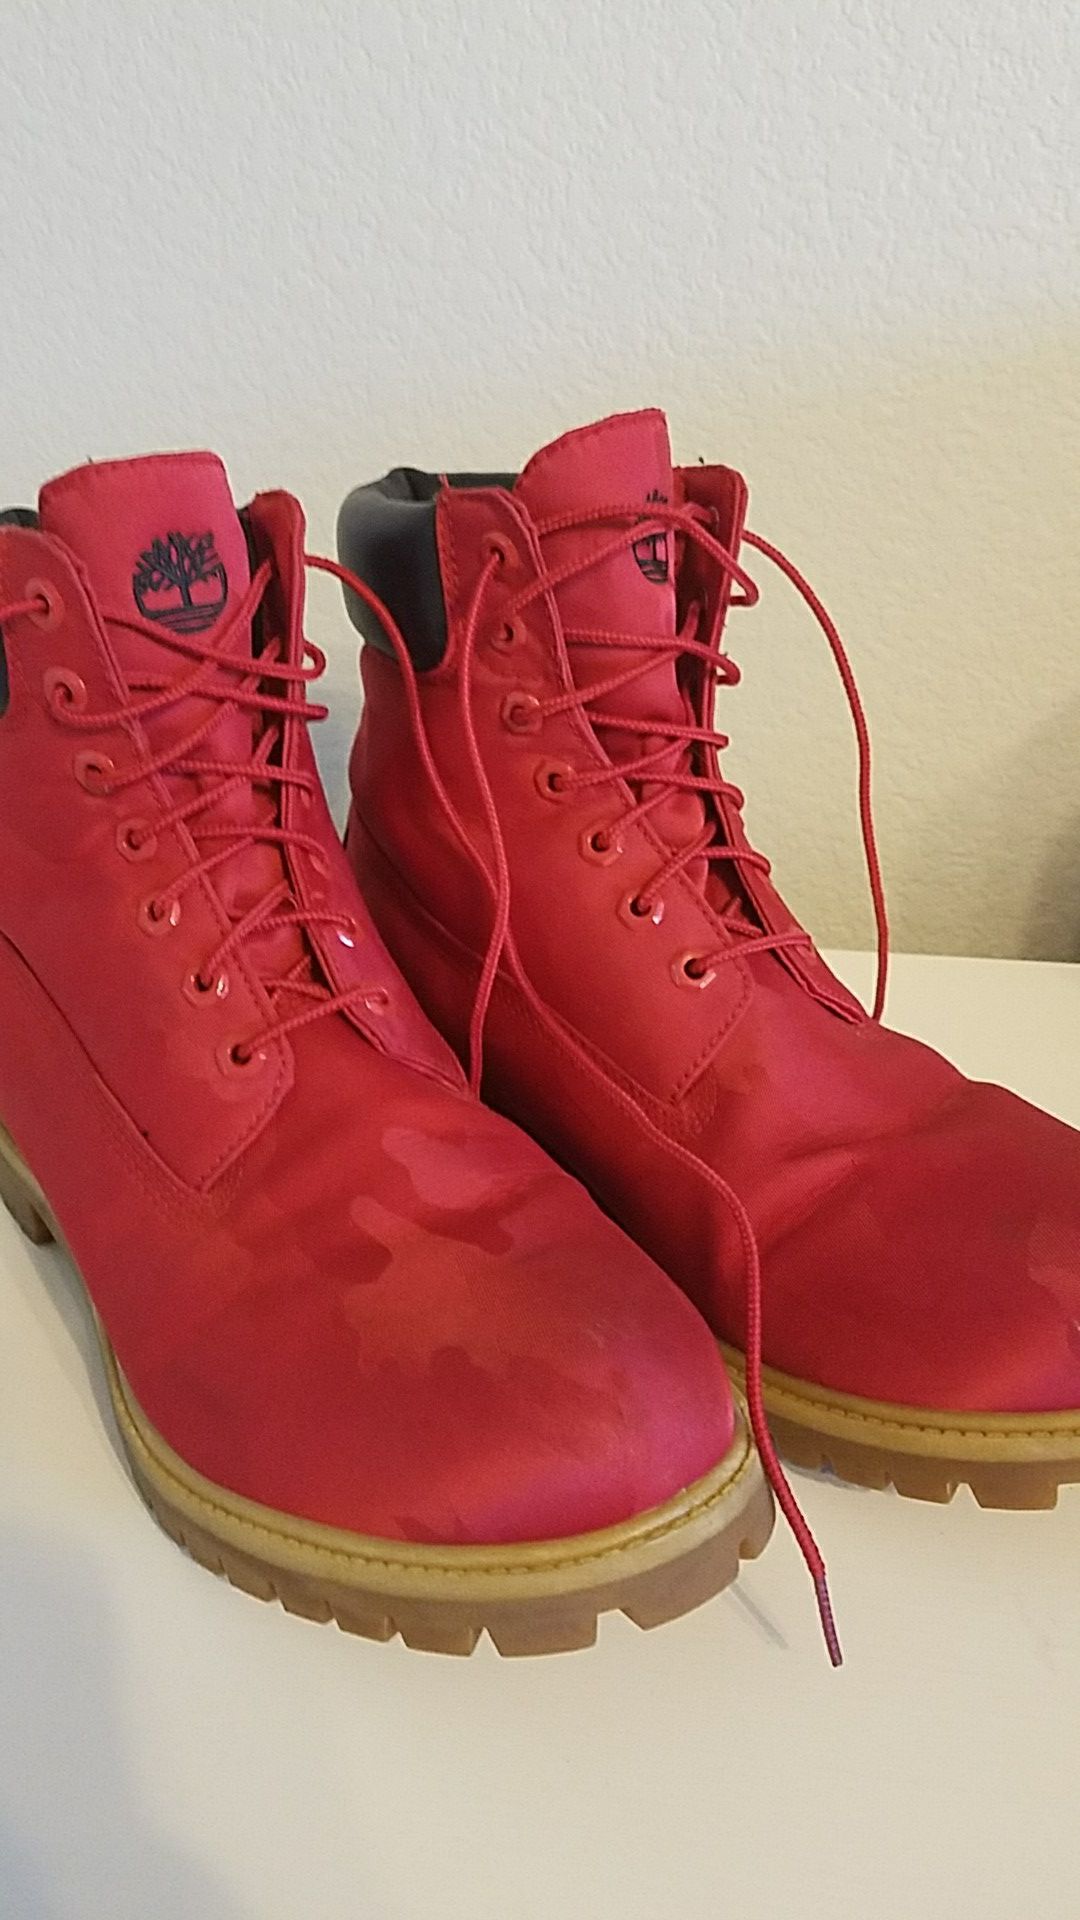 Red camo timberland boots (size 12)